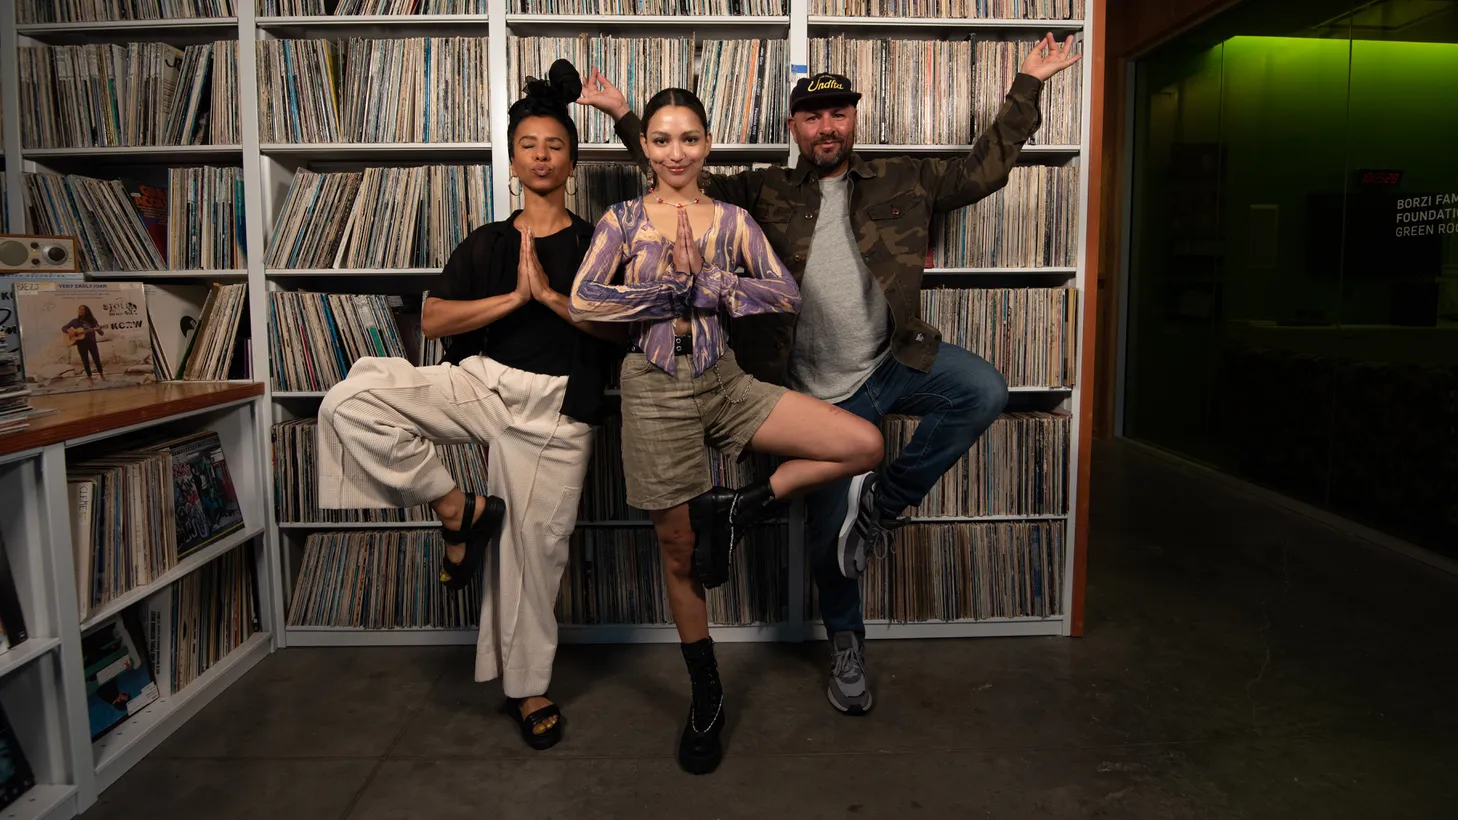 Novena, Ambar Lucid, and Anthony strike a pose at KCRW.